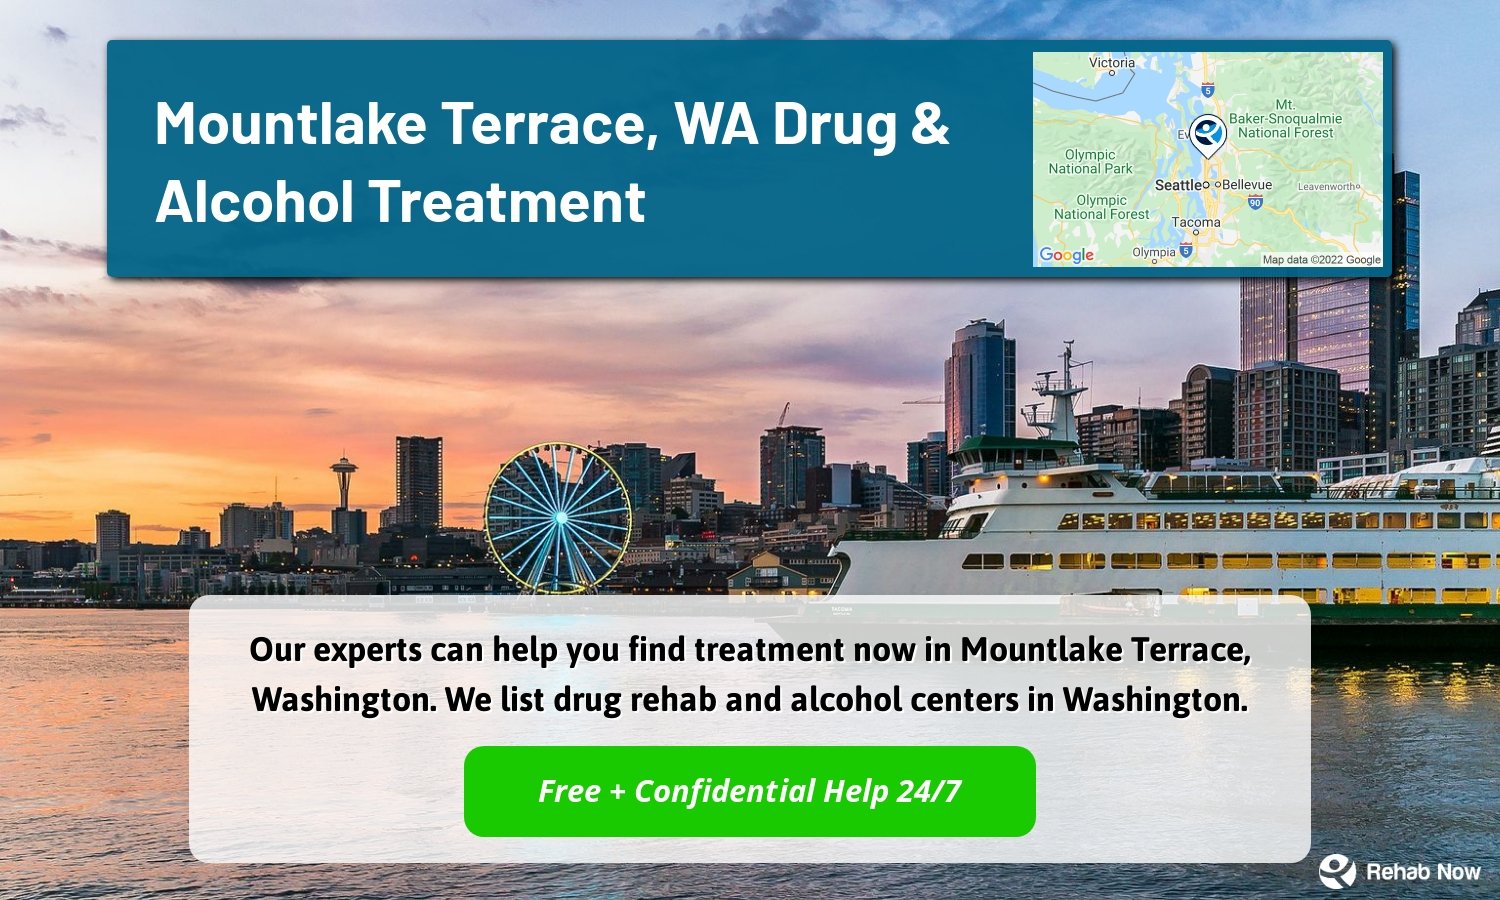 Our experts can help you find treatment now in Mountlake Terrace, Washington. We list drug rehab and alcohol centers in Washington.